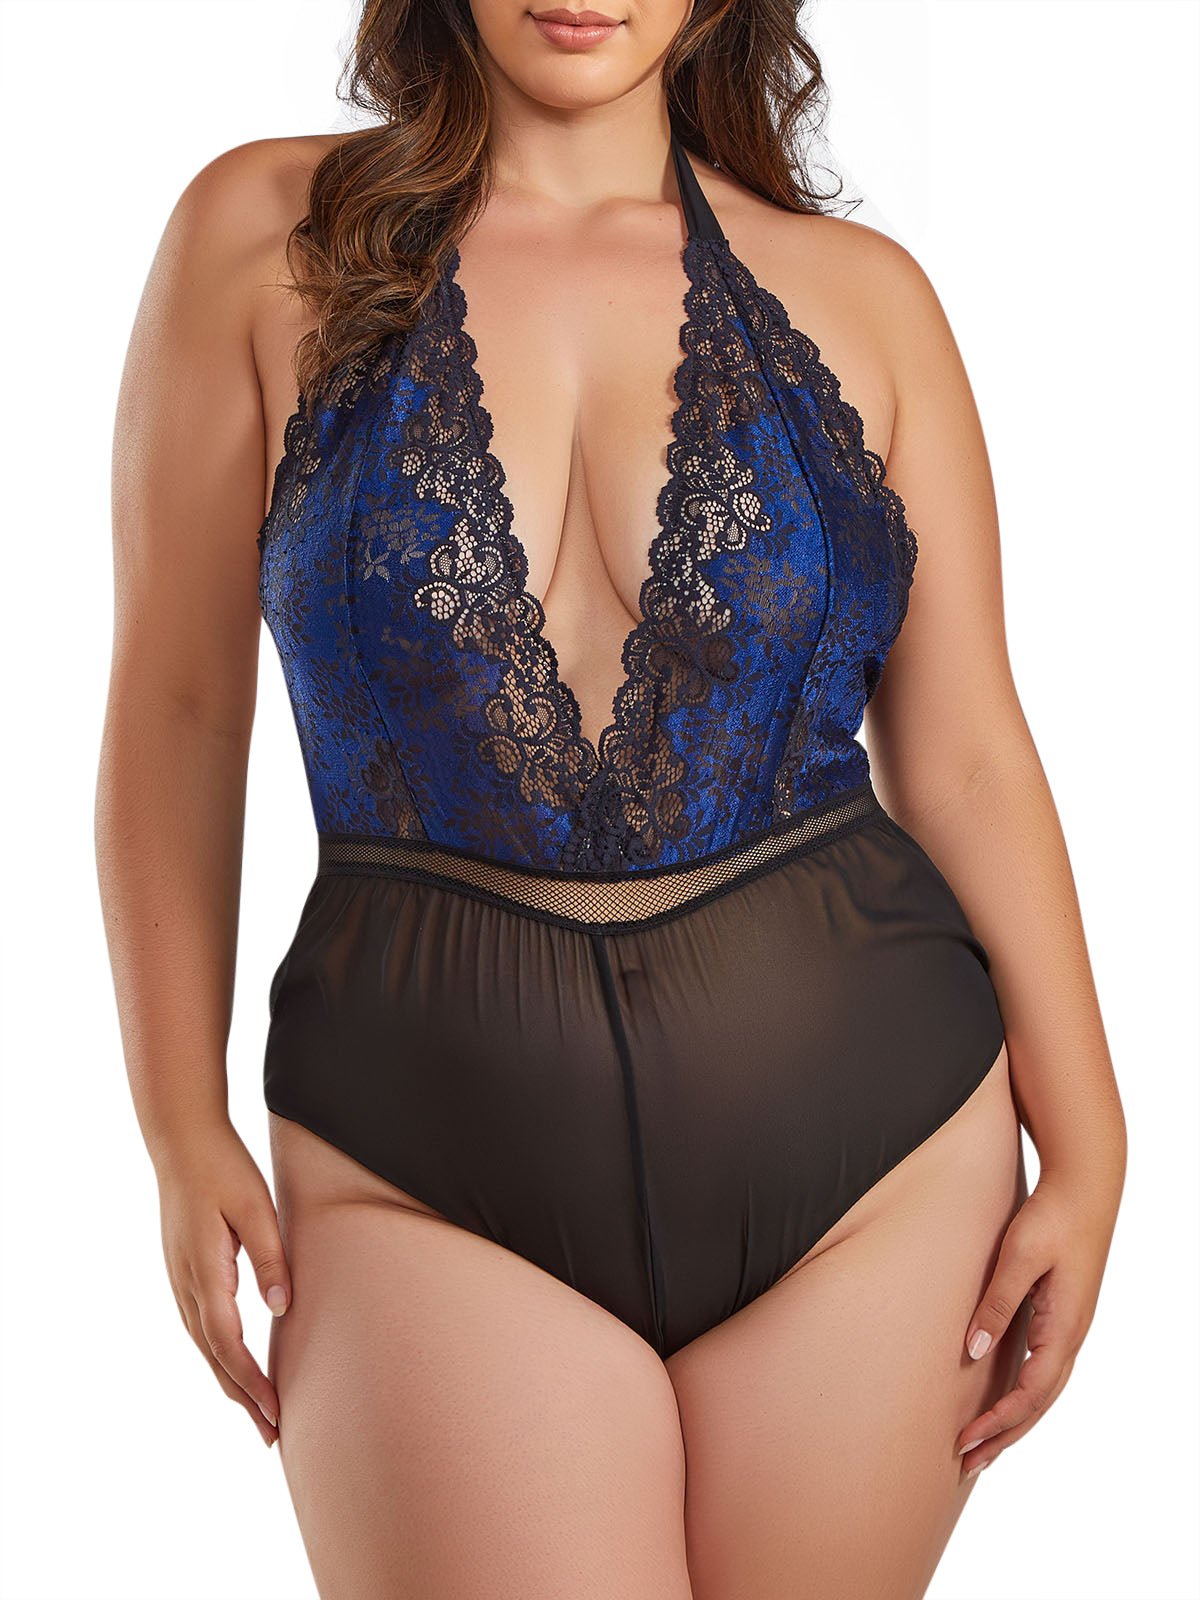 iCollection Teddy Women&#39;s Marley Plus Size Teddy Lingerie